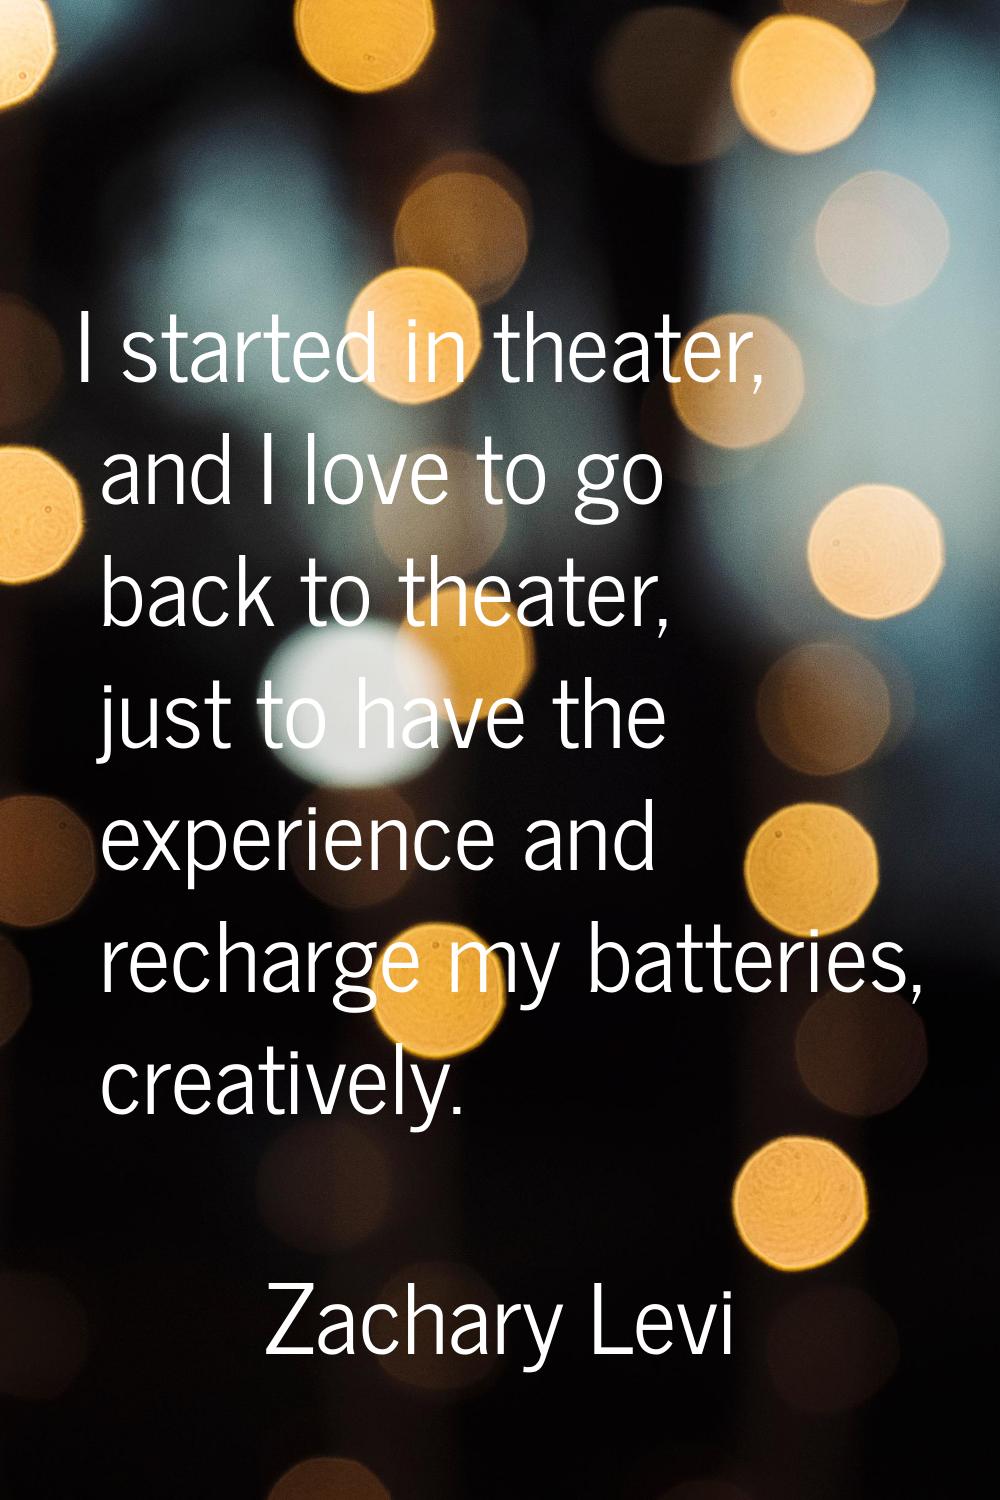 I started in theater, and I love to go back to theater, just to have the experience and recharge my